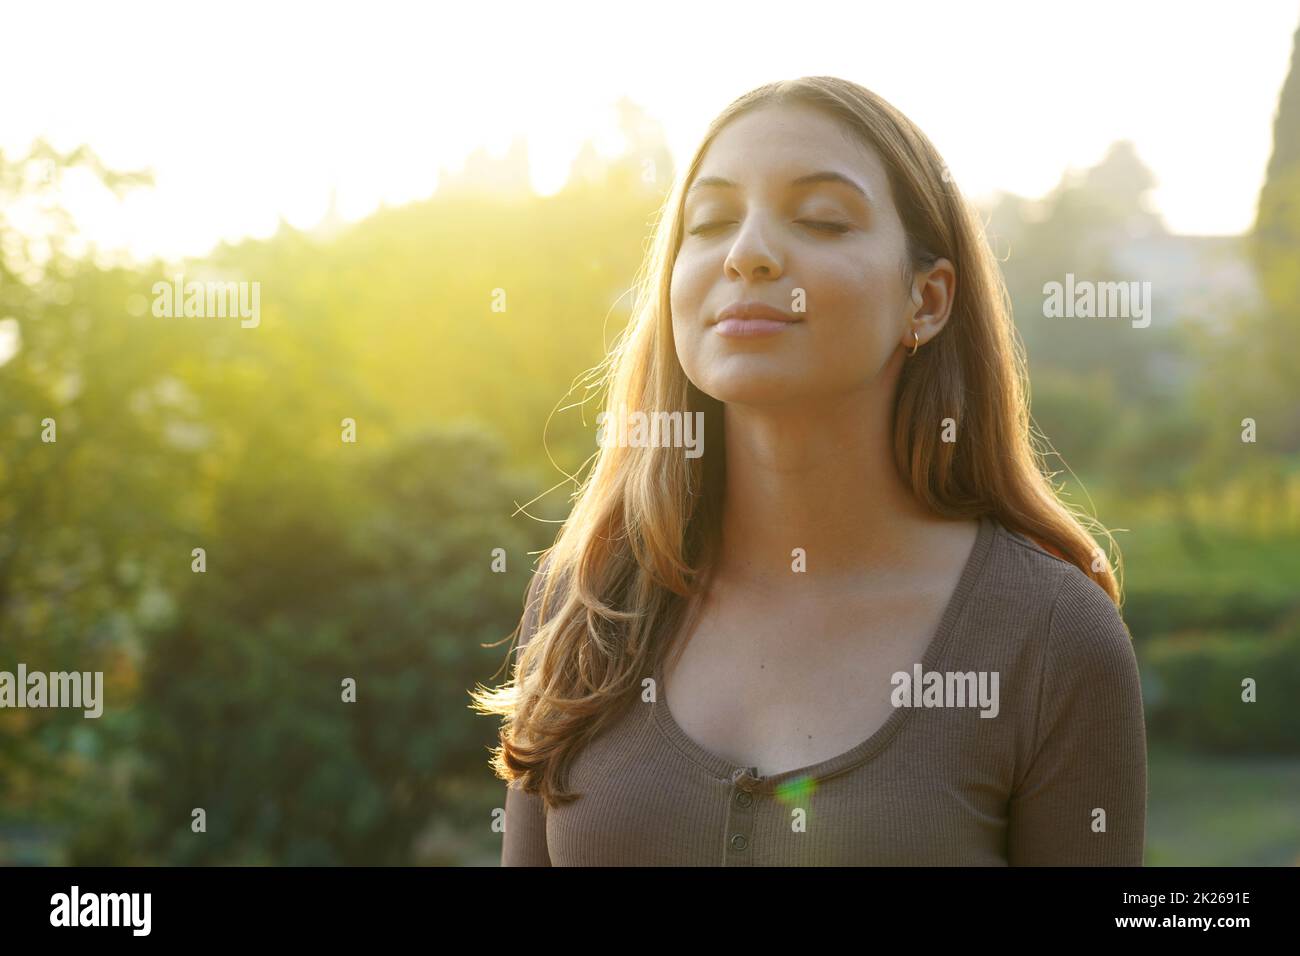 Portrait of beauty woman breathing fresh air against natural background. Copy space Stock Photo